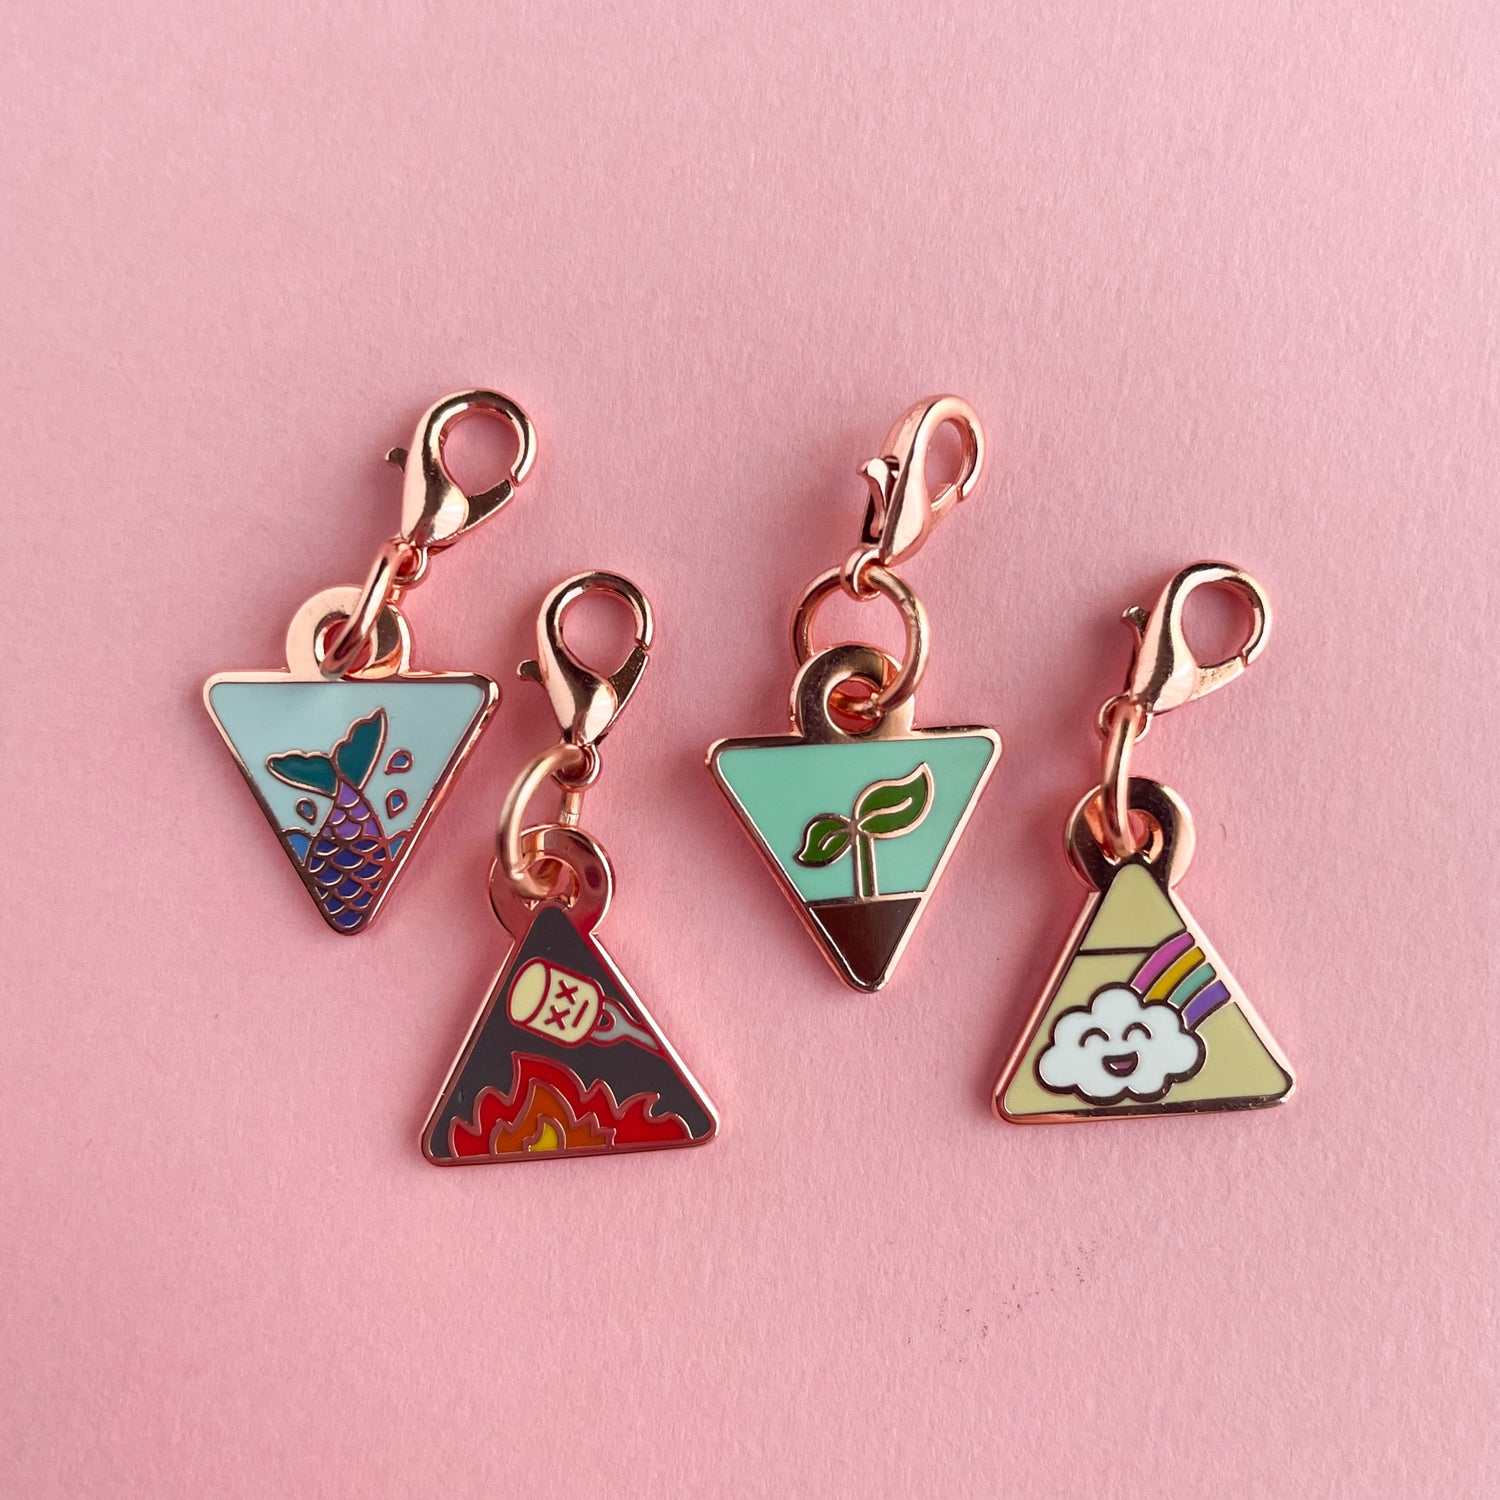 Four triangle shaped charms with lobster claw clasps. There is a mermaid tail charm, a fire with a marshmallow charm, a plant sprouting charm, and a happy rainbow cloud charm.  The charms are on a pink background